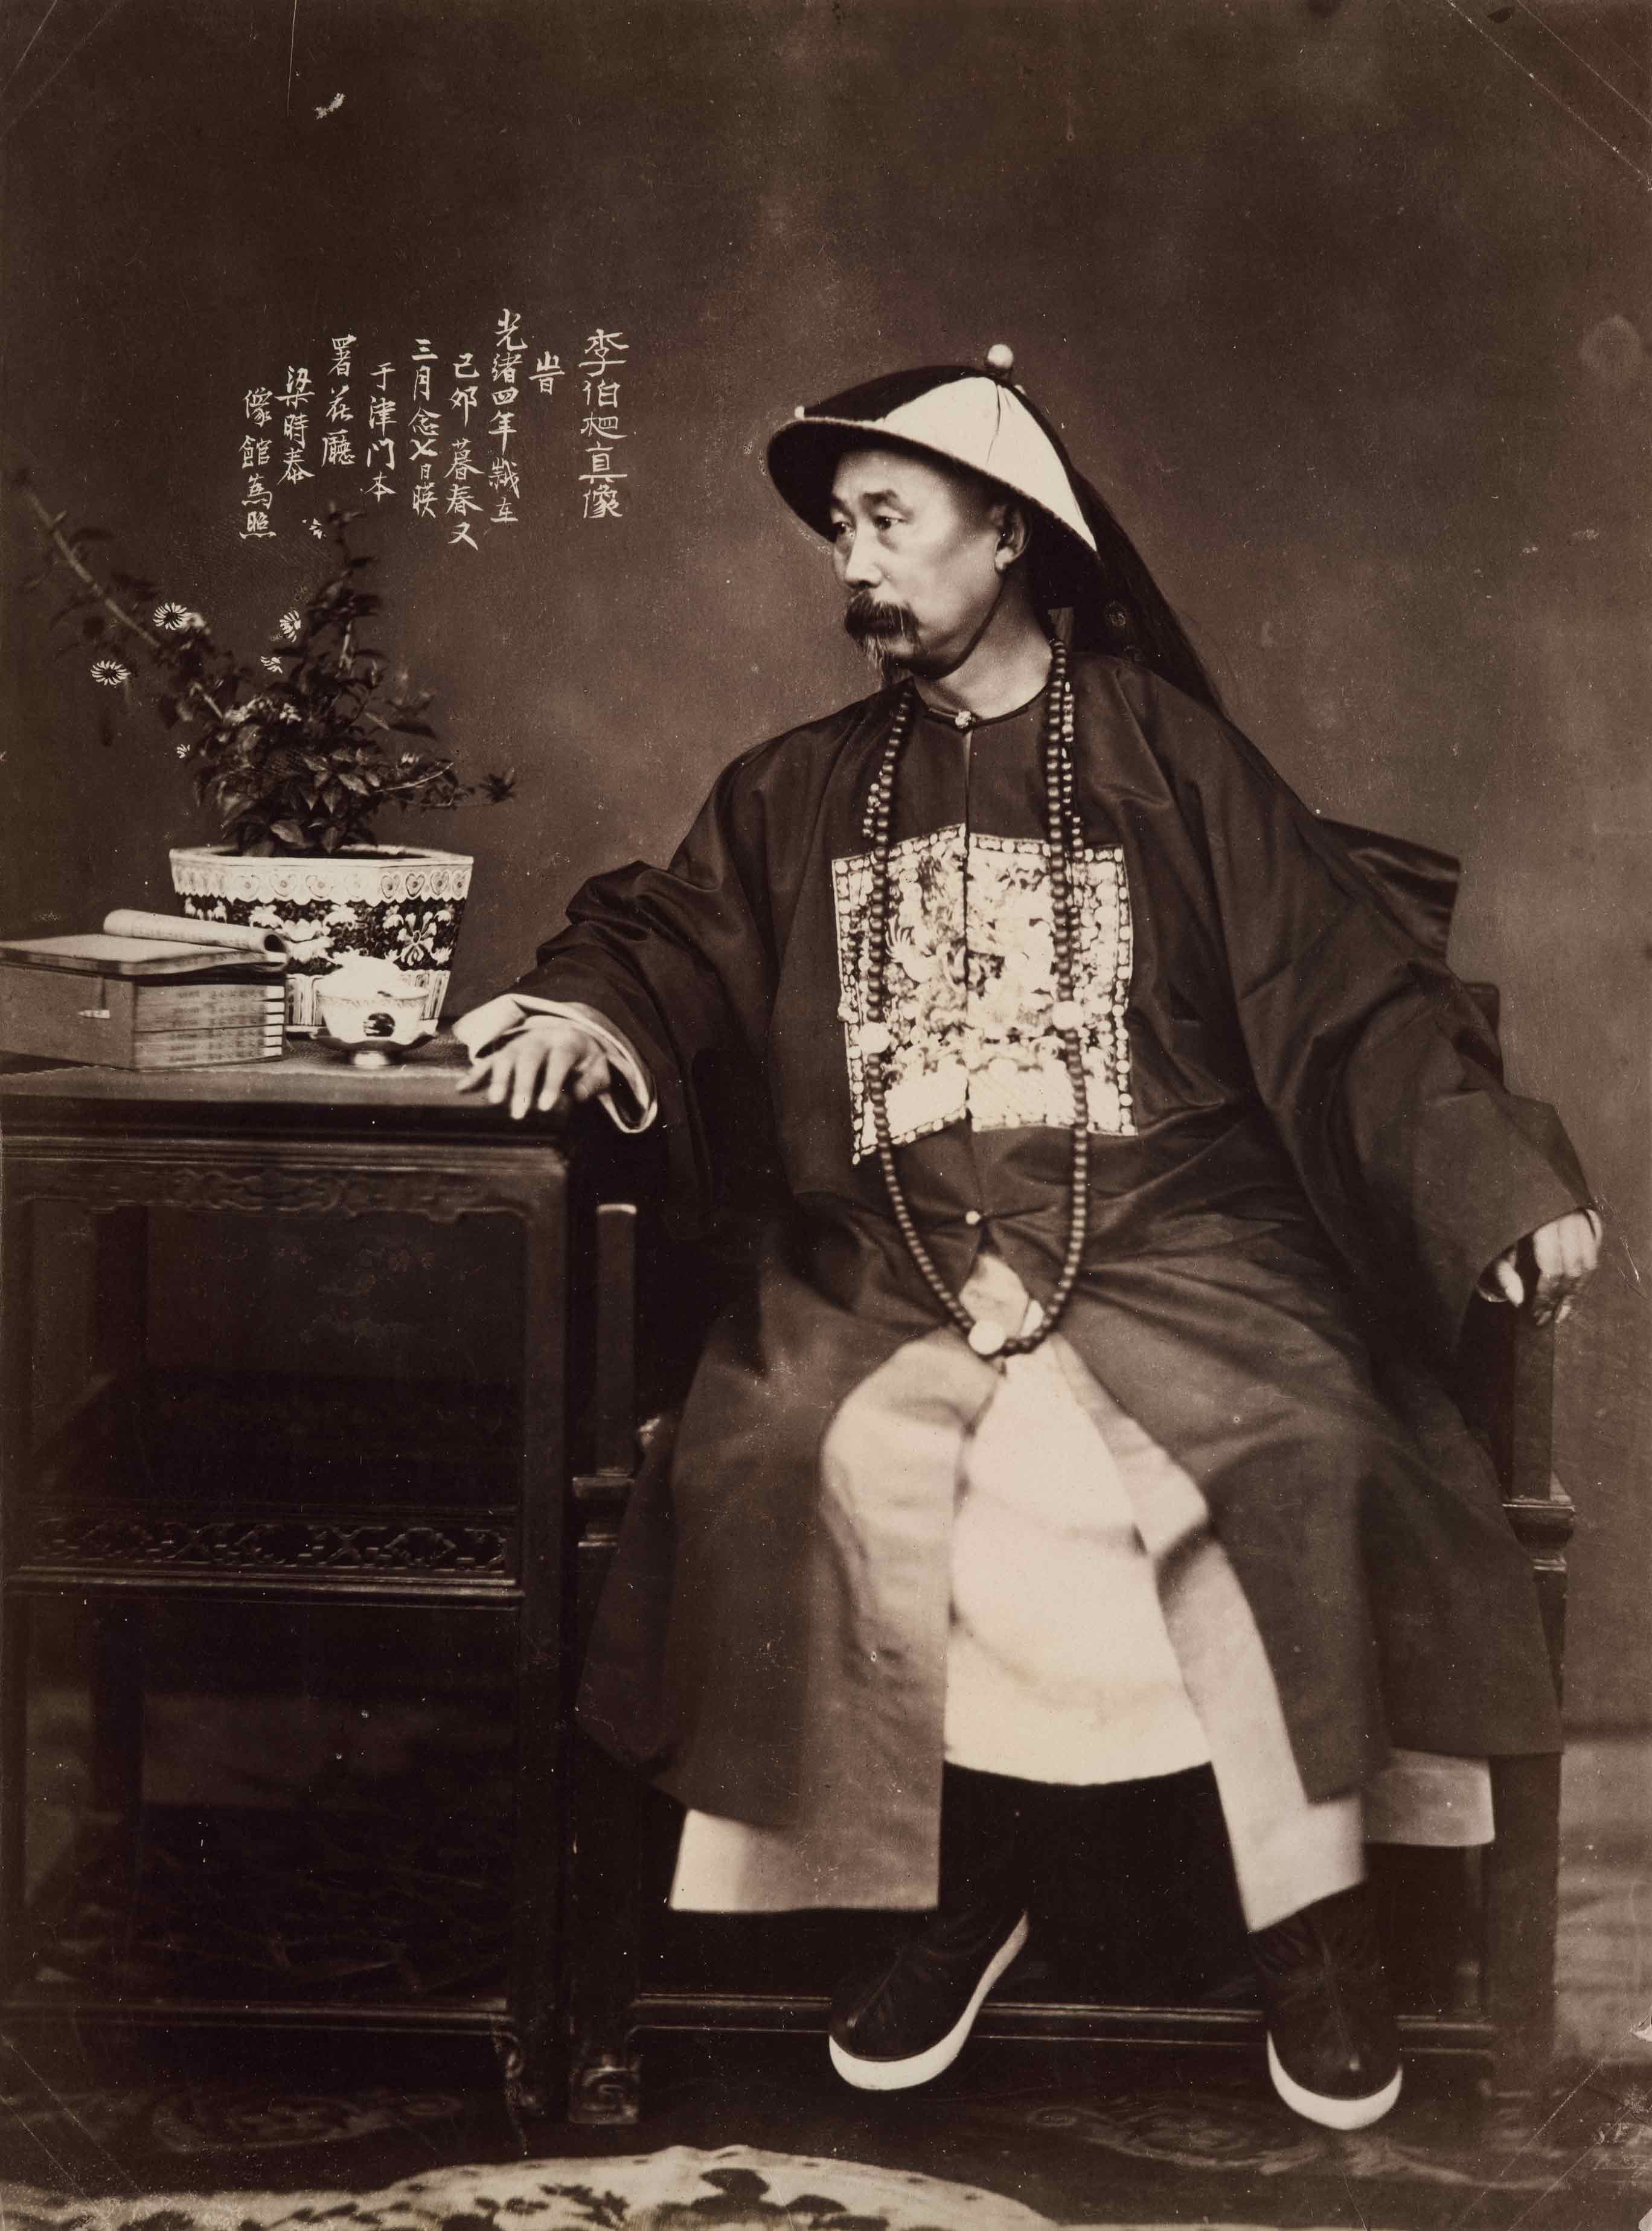 ONE OF THE MOST INFLUENTIAL LEADERS OF THE 19TH CENTURY: LIANG SHITAI’S PORTRAIT OF LI HONGZHANG